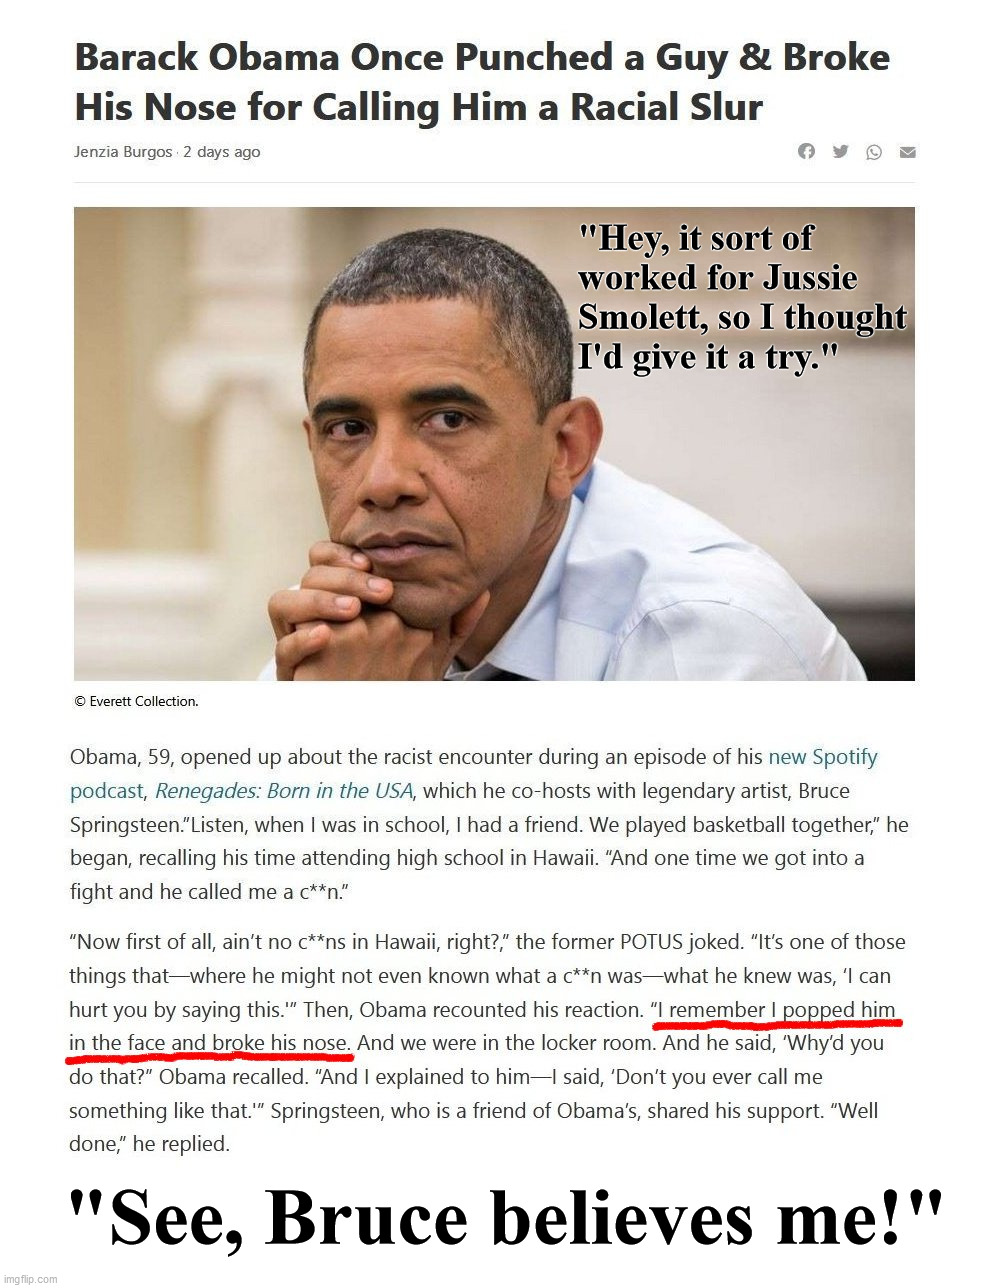 Tough guy Obama | "Hey, it sort of worked for Jussie Smolett, so I thought I'd give it a try."; "See, Bruce believes me!" | image tagged in obama,hoax,jussie smolett,bs | made w/ Imgflip meme maker